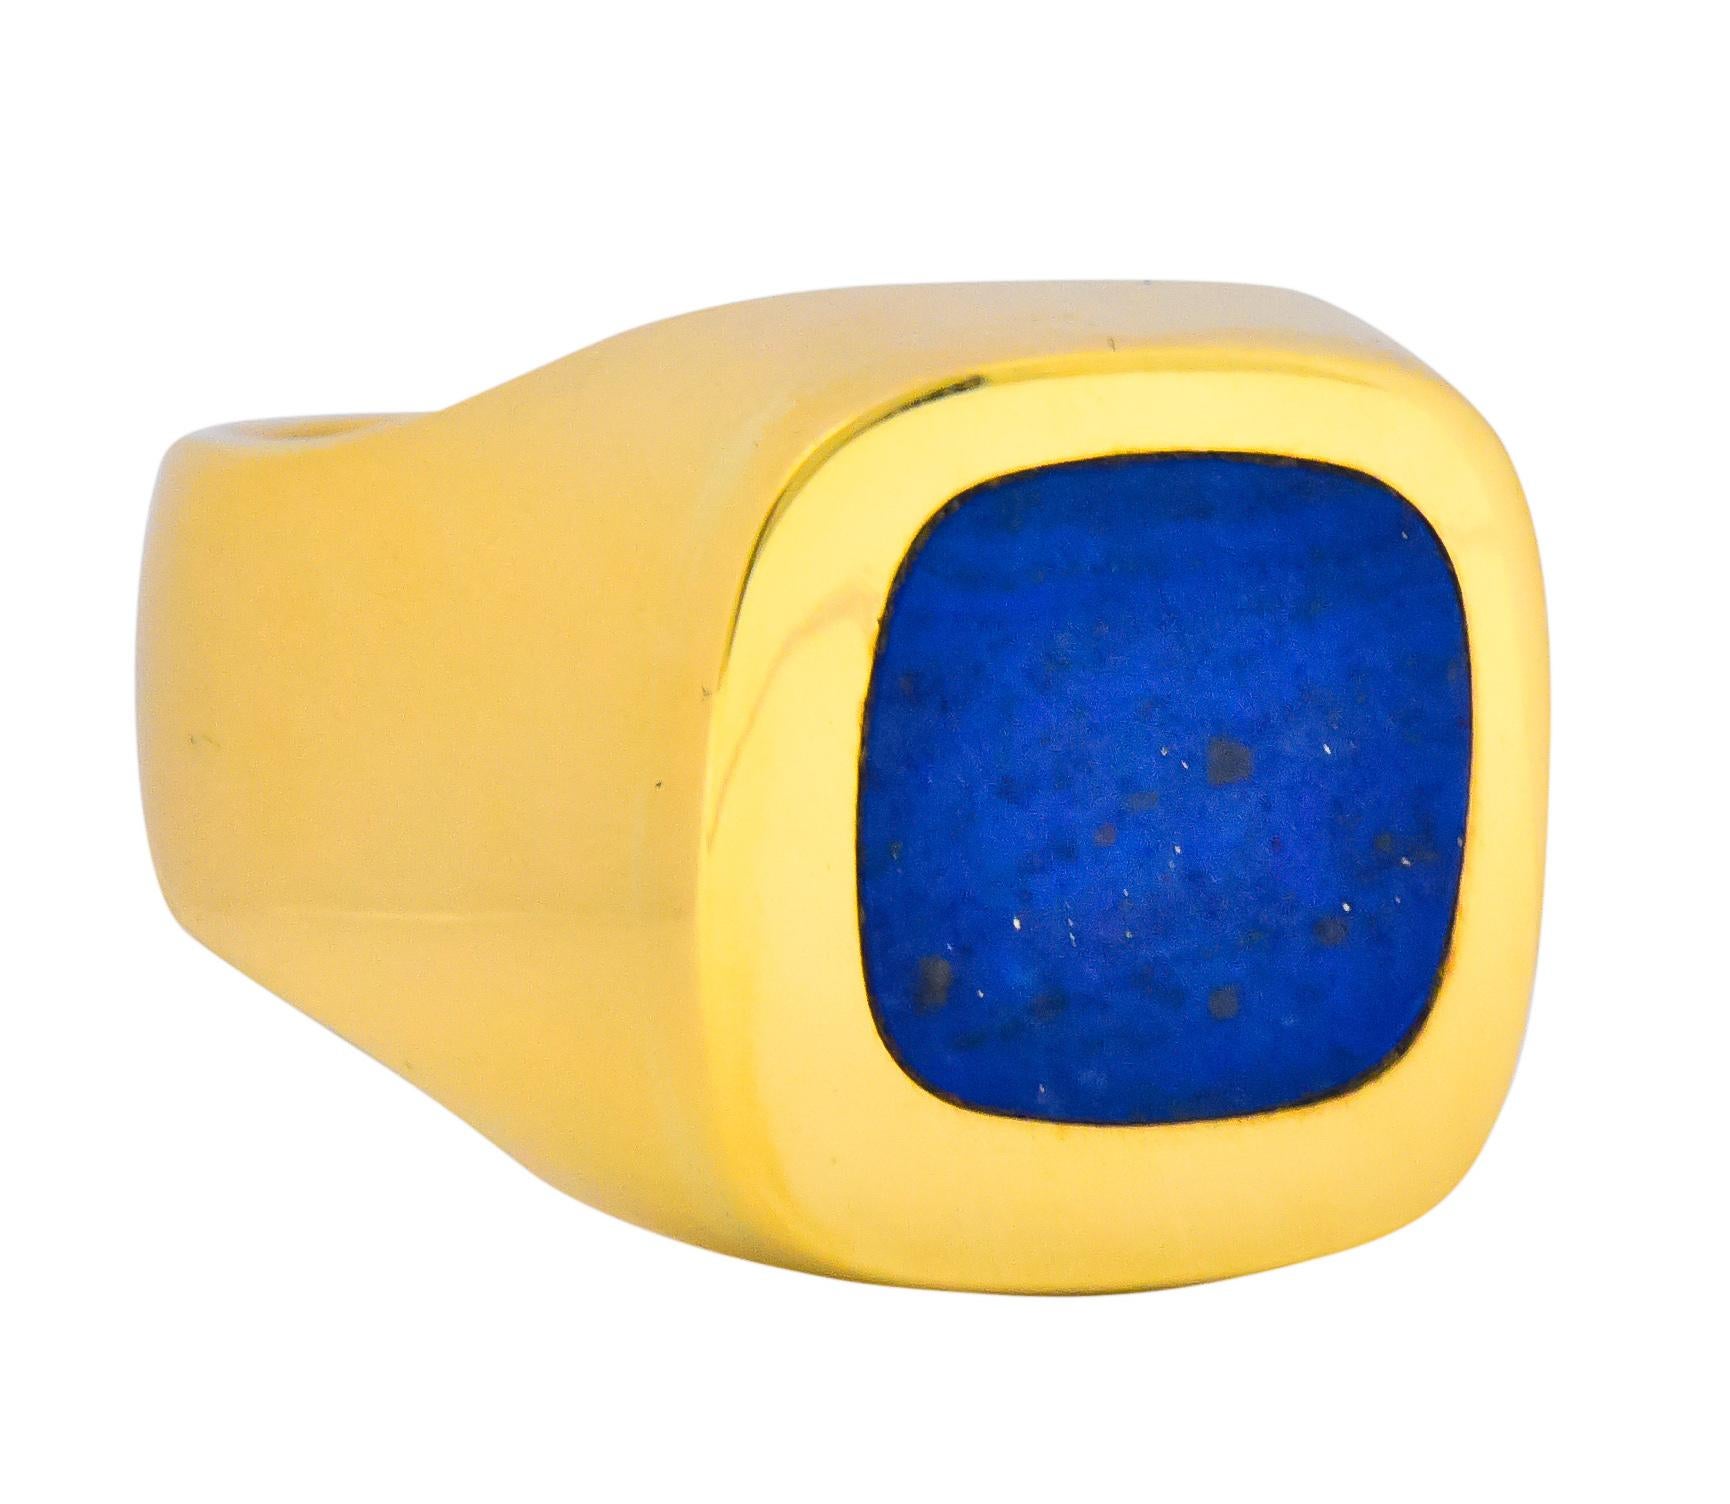 Rounded square lapis slice measuring approximately 12.0 mm, dark ultramarine blue with very little gold pyrite flecking, excellent polish

Flush set into face of rounded square highly polished gold ring

Maker's mark for Gübelin

Stamped with